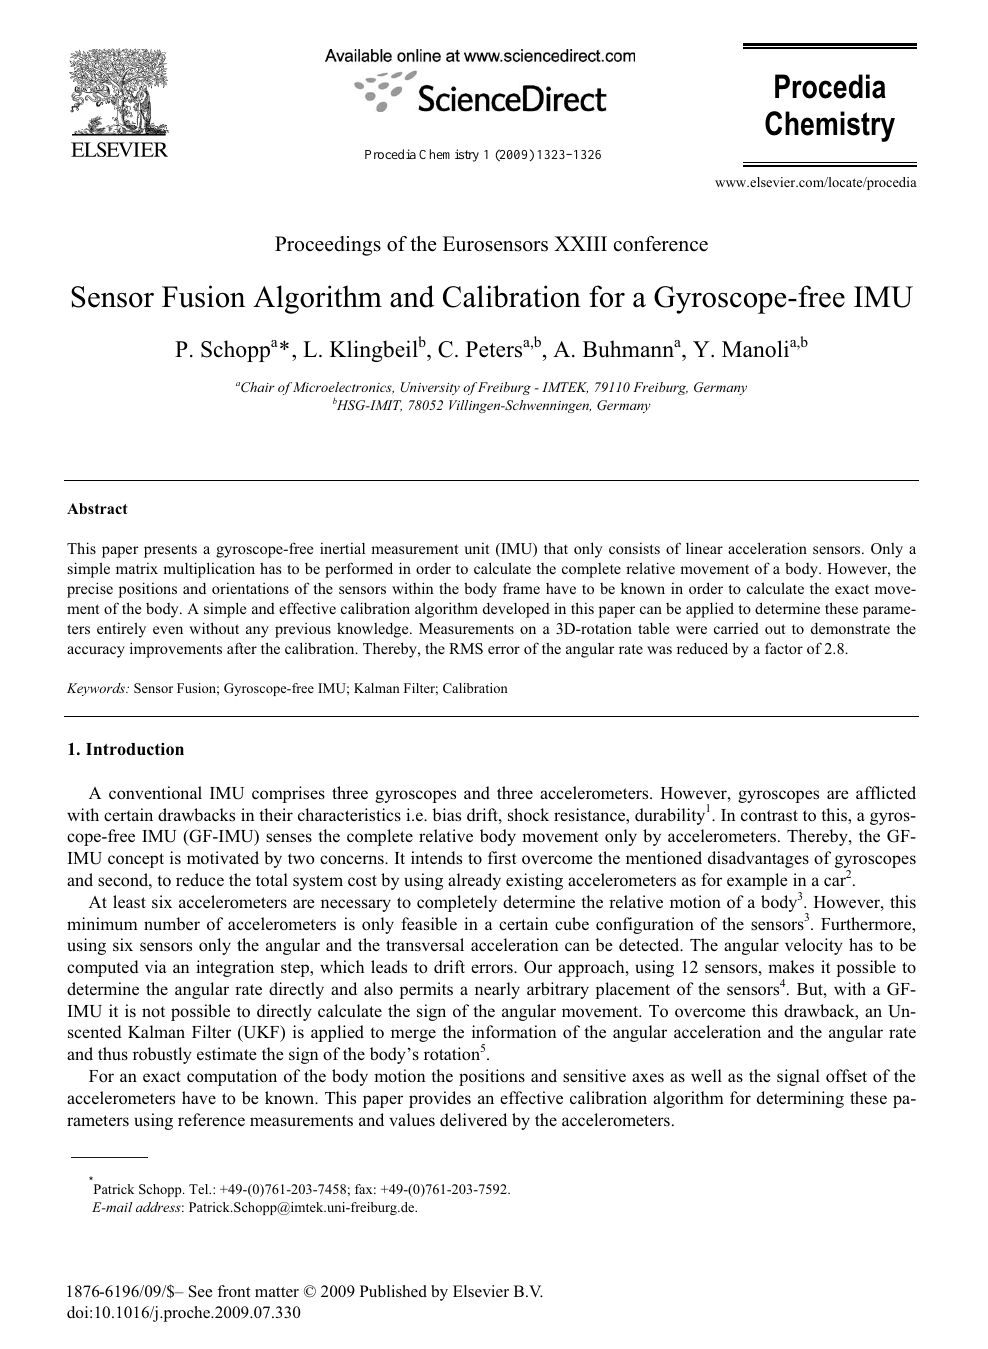 Sensor Fusion Algorithm And Calibration For A Gyroscope Free Imu Topic Of Research Paper In Electrical Engineering Electronic Engineering Information Engineering Download Scholarly Article Pdf And Read For Free On Cyberleninka Open